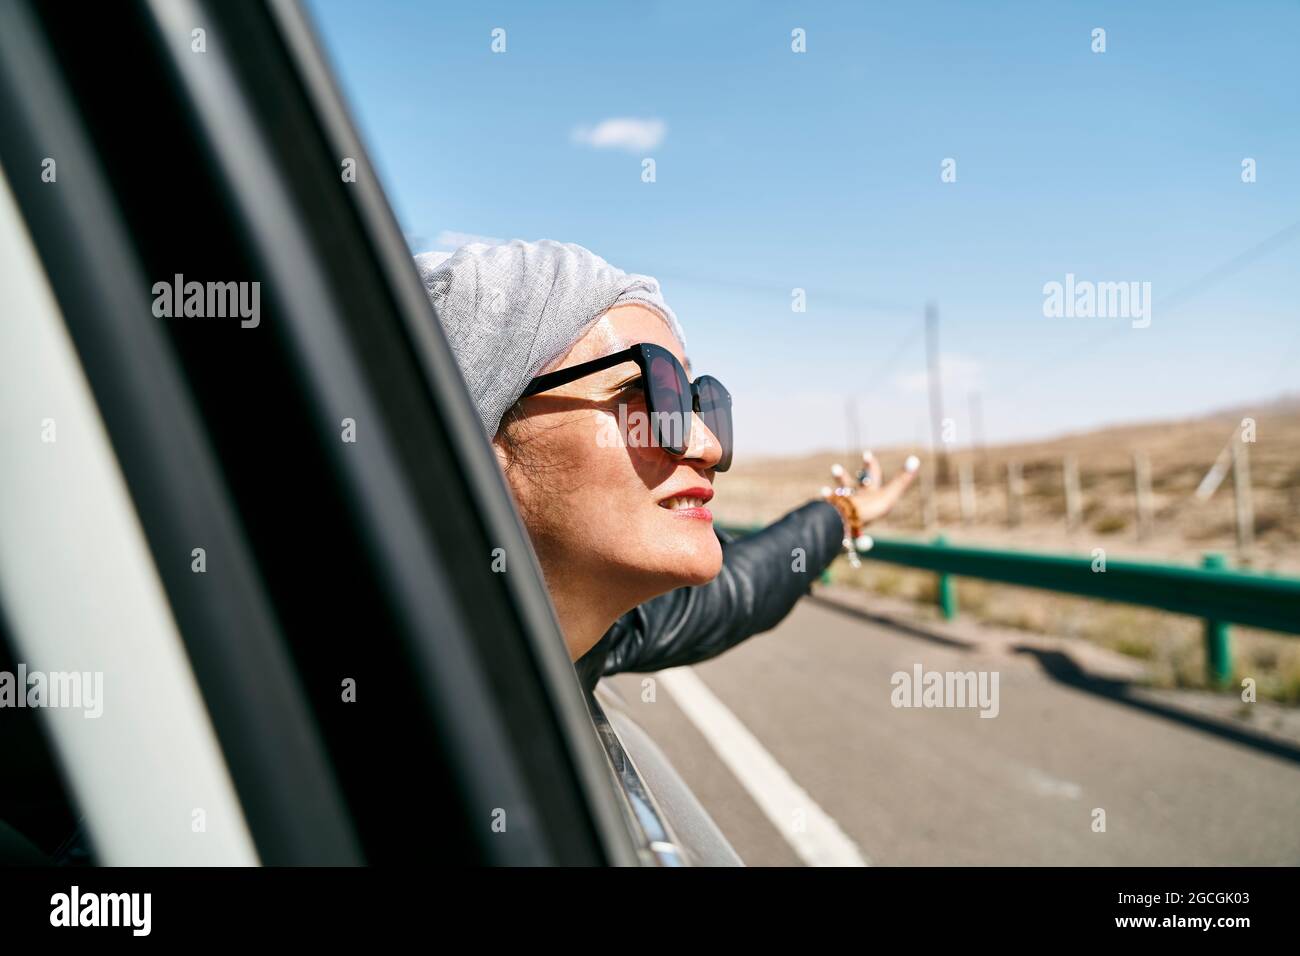 asian woman tourist sticking head out of rear window of a car and enjoying a road trip Stock Photo